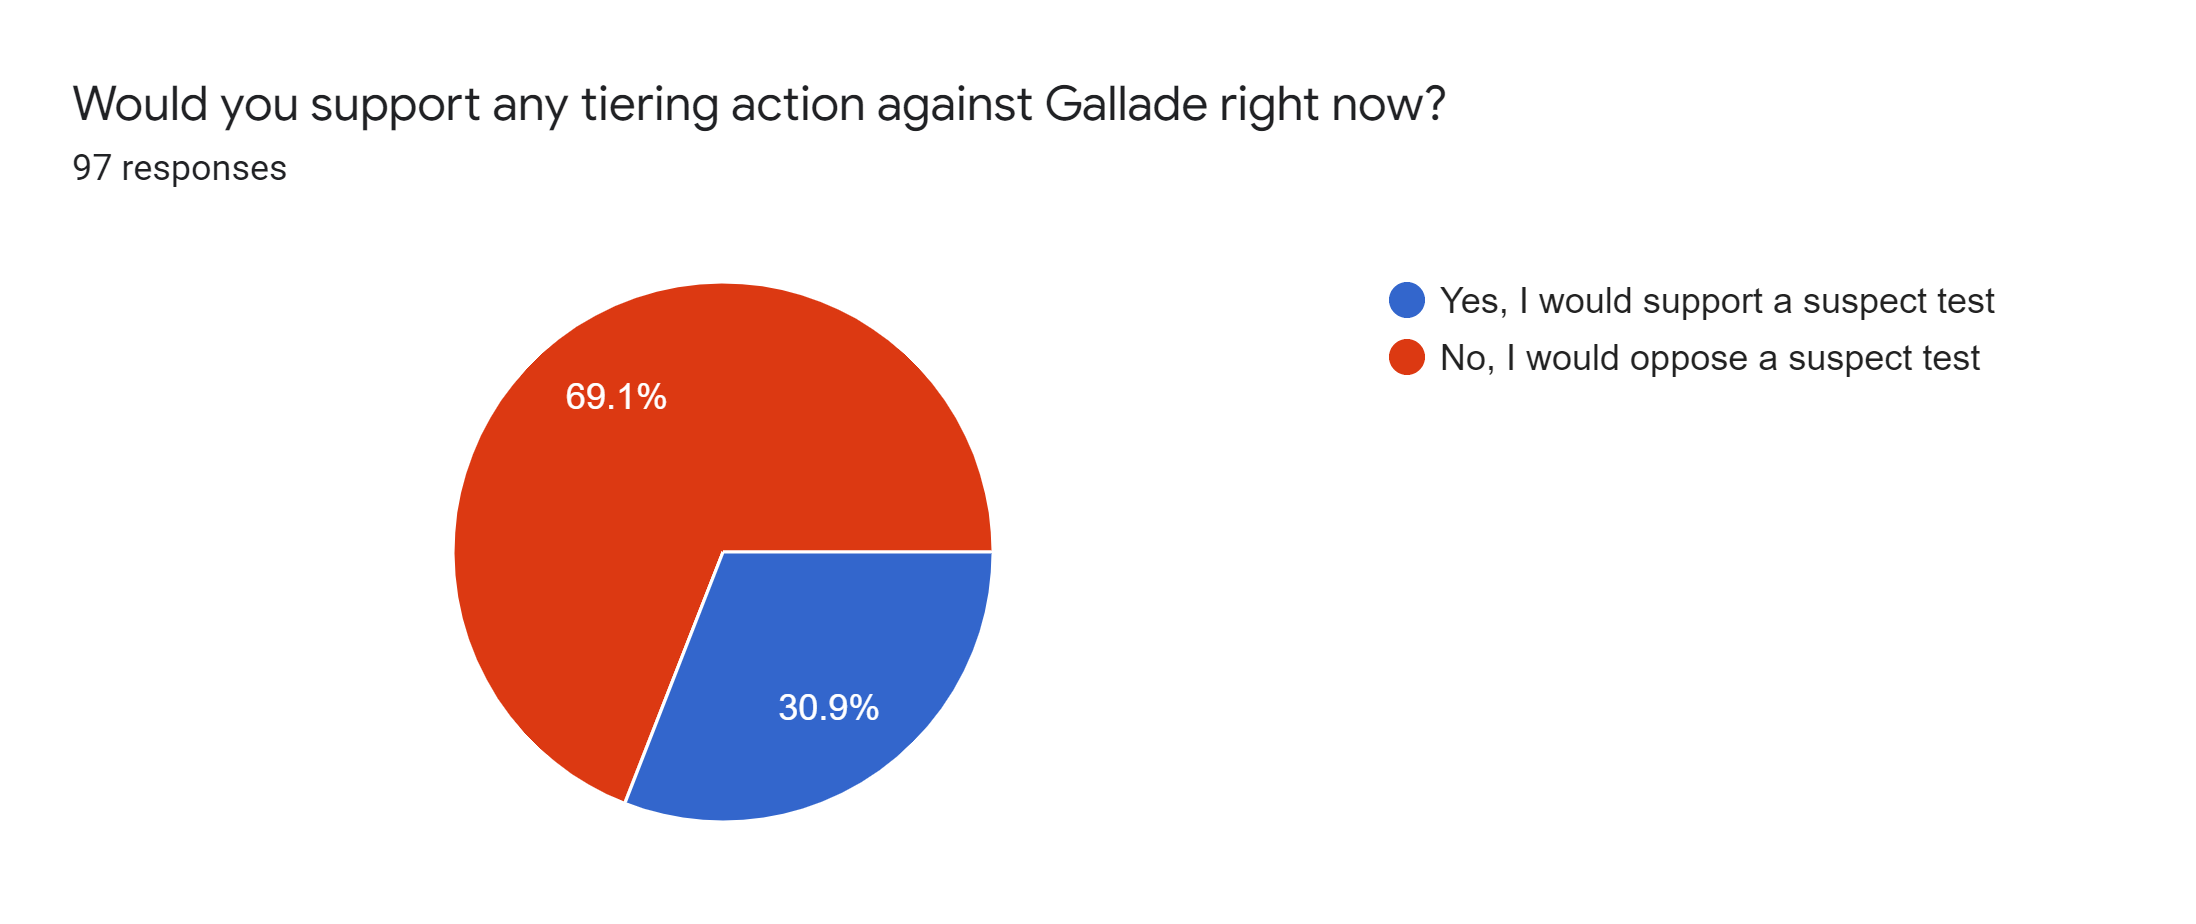 Forms response chart. Question title: Would you support any tiering action against Gallade right now?. Number of responses: 97 responses.